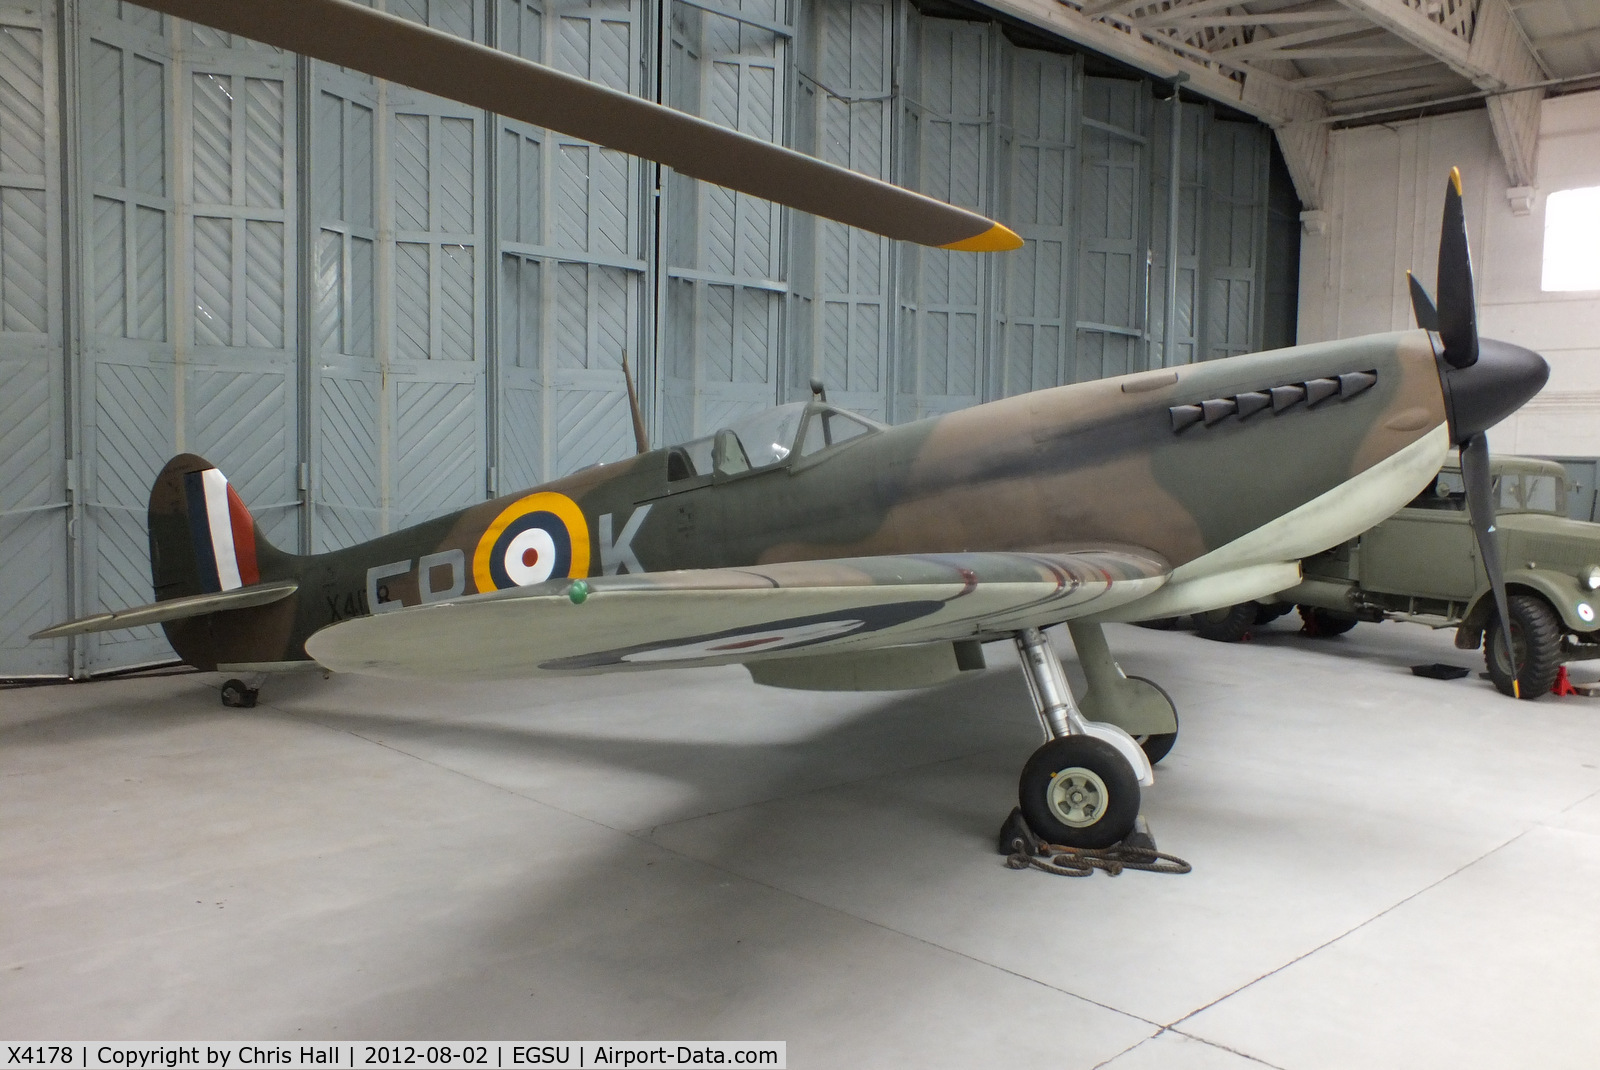 X4178, Supermarine Spitfire 300 Mk 1 Replica C/N None (X4178), In the markings of Spitfire Mk.I code EB-K operated by No 41 Squadron at RAF Hornchurch during Battle of Britain